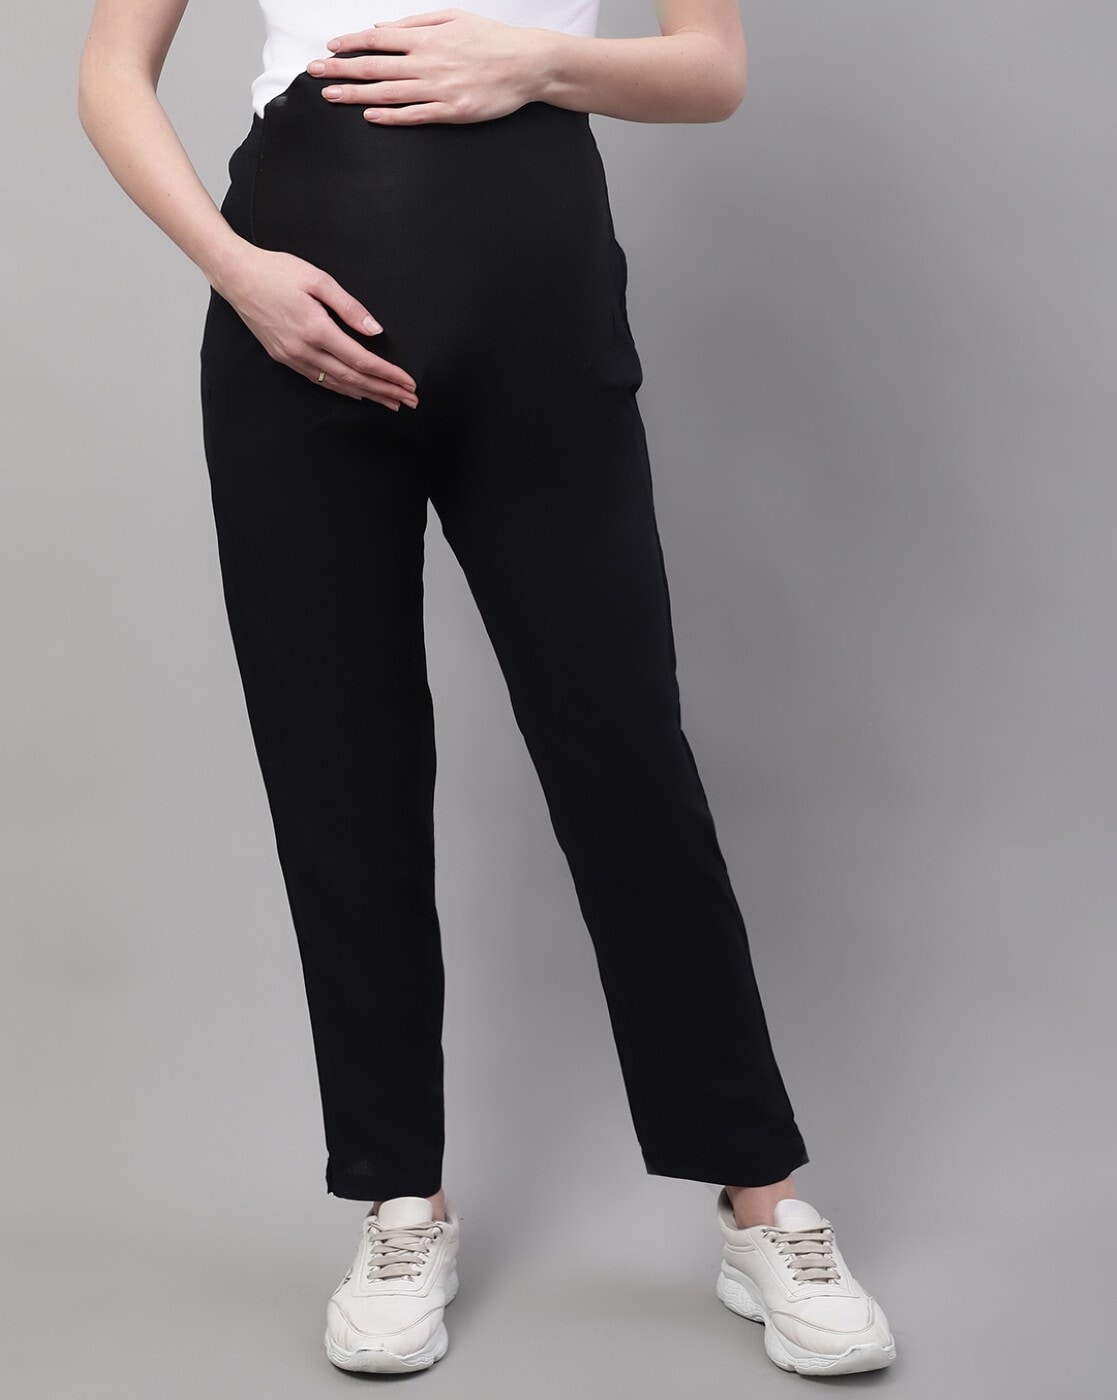 Buy Mamacouture Maternity TrousersPants Formal Office Wear Black at  Amazonin